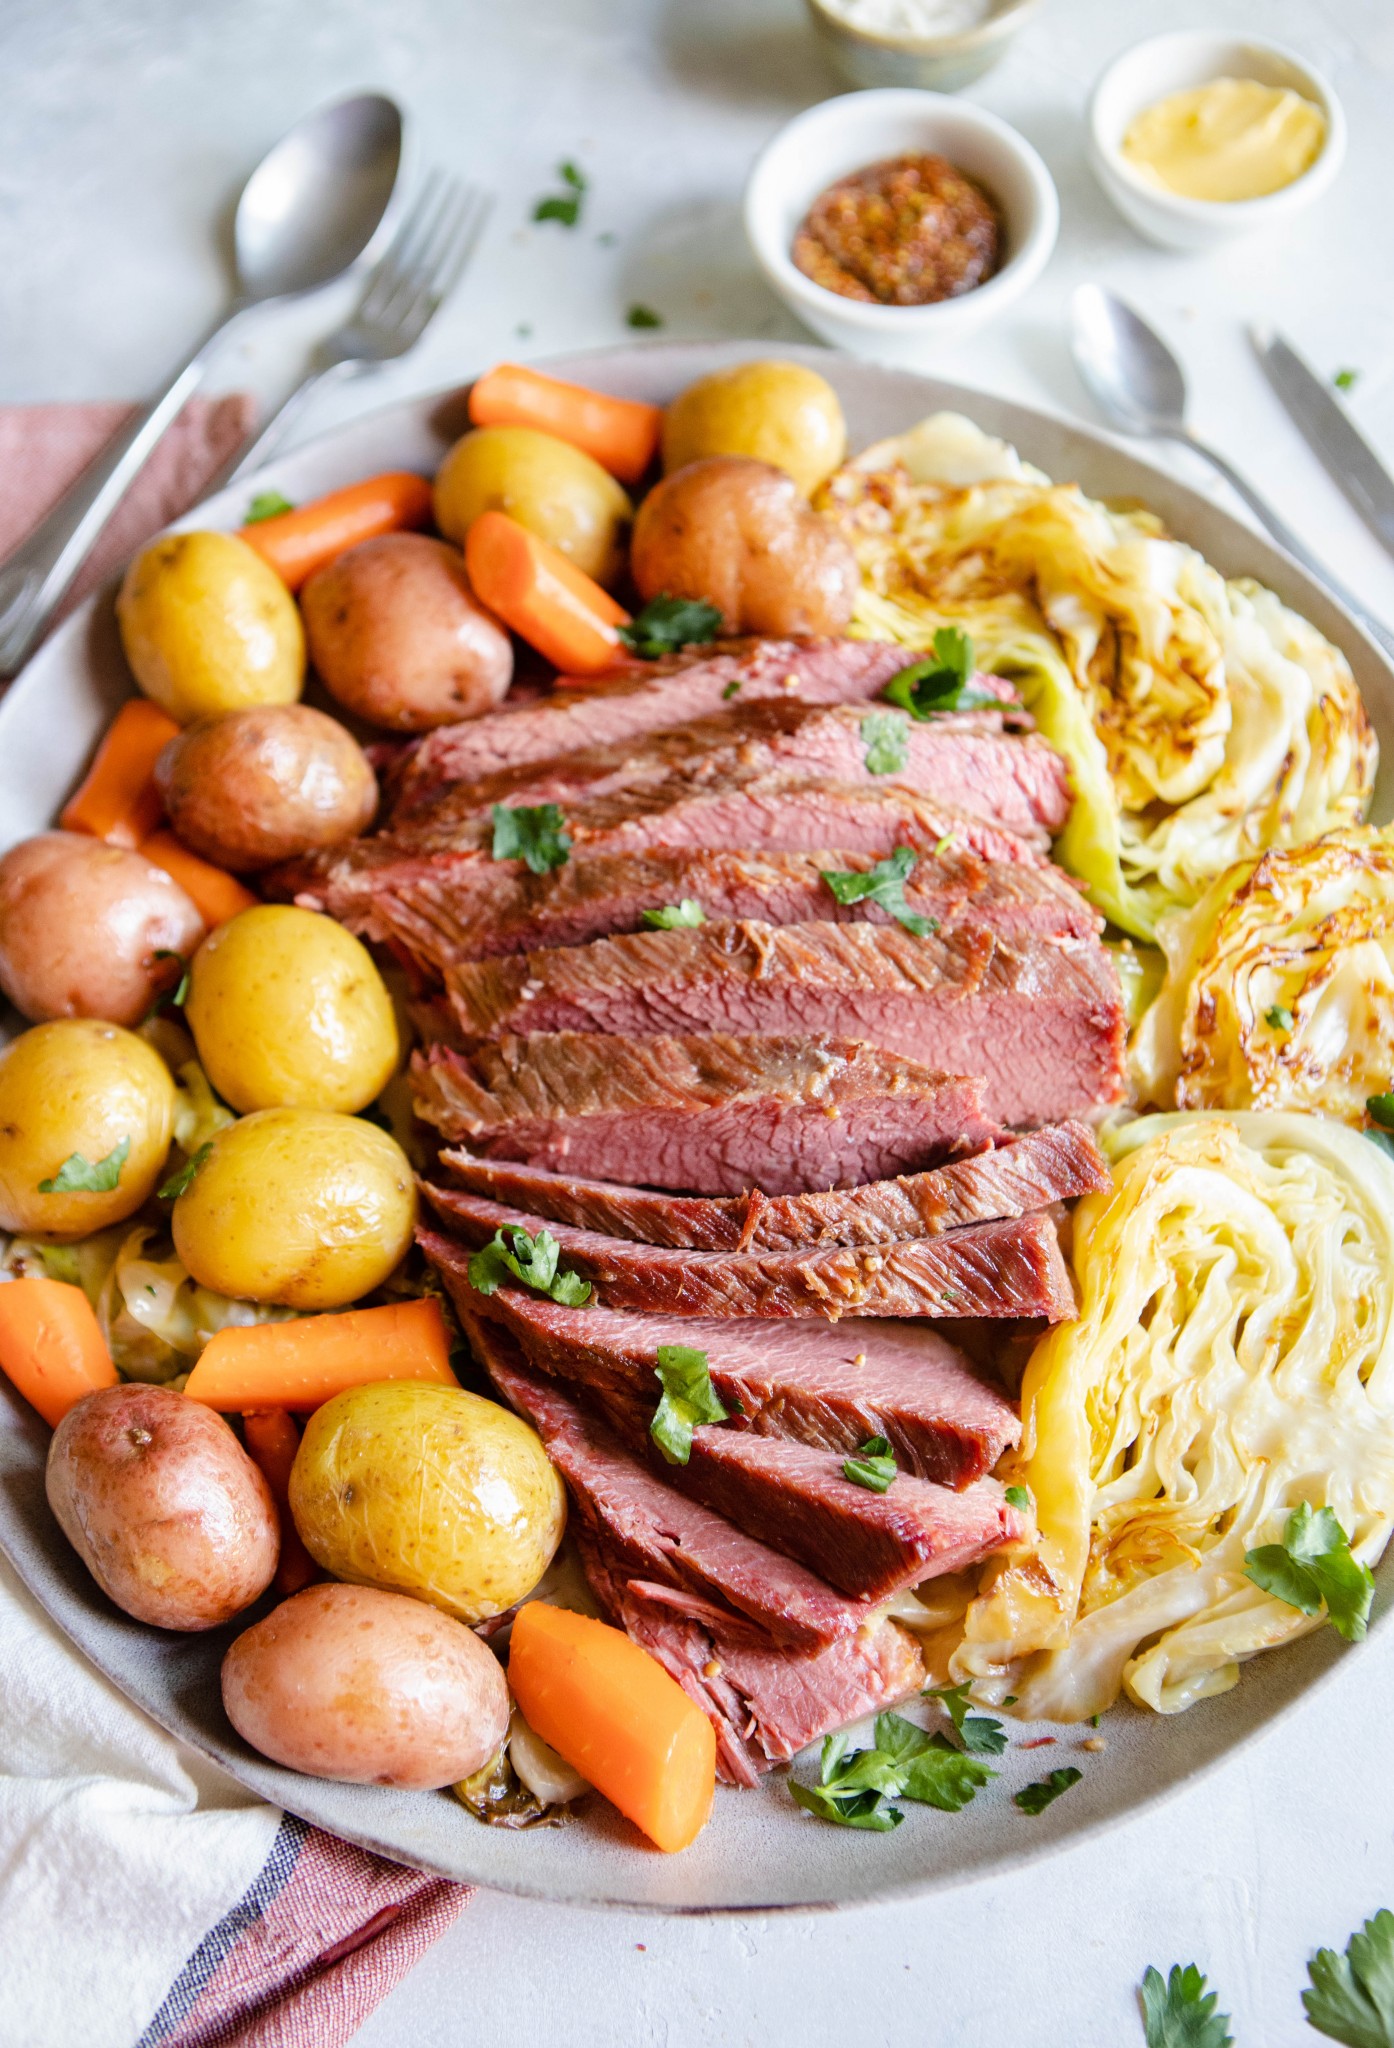 large round plater filled with corned beef, cabbage and potatoes 